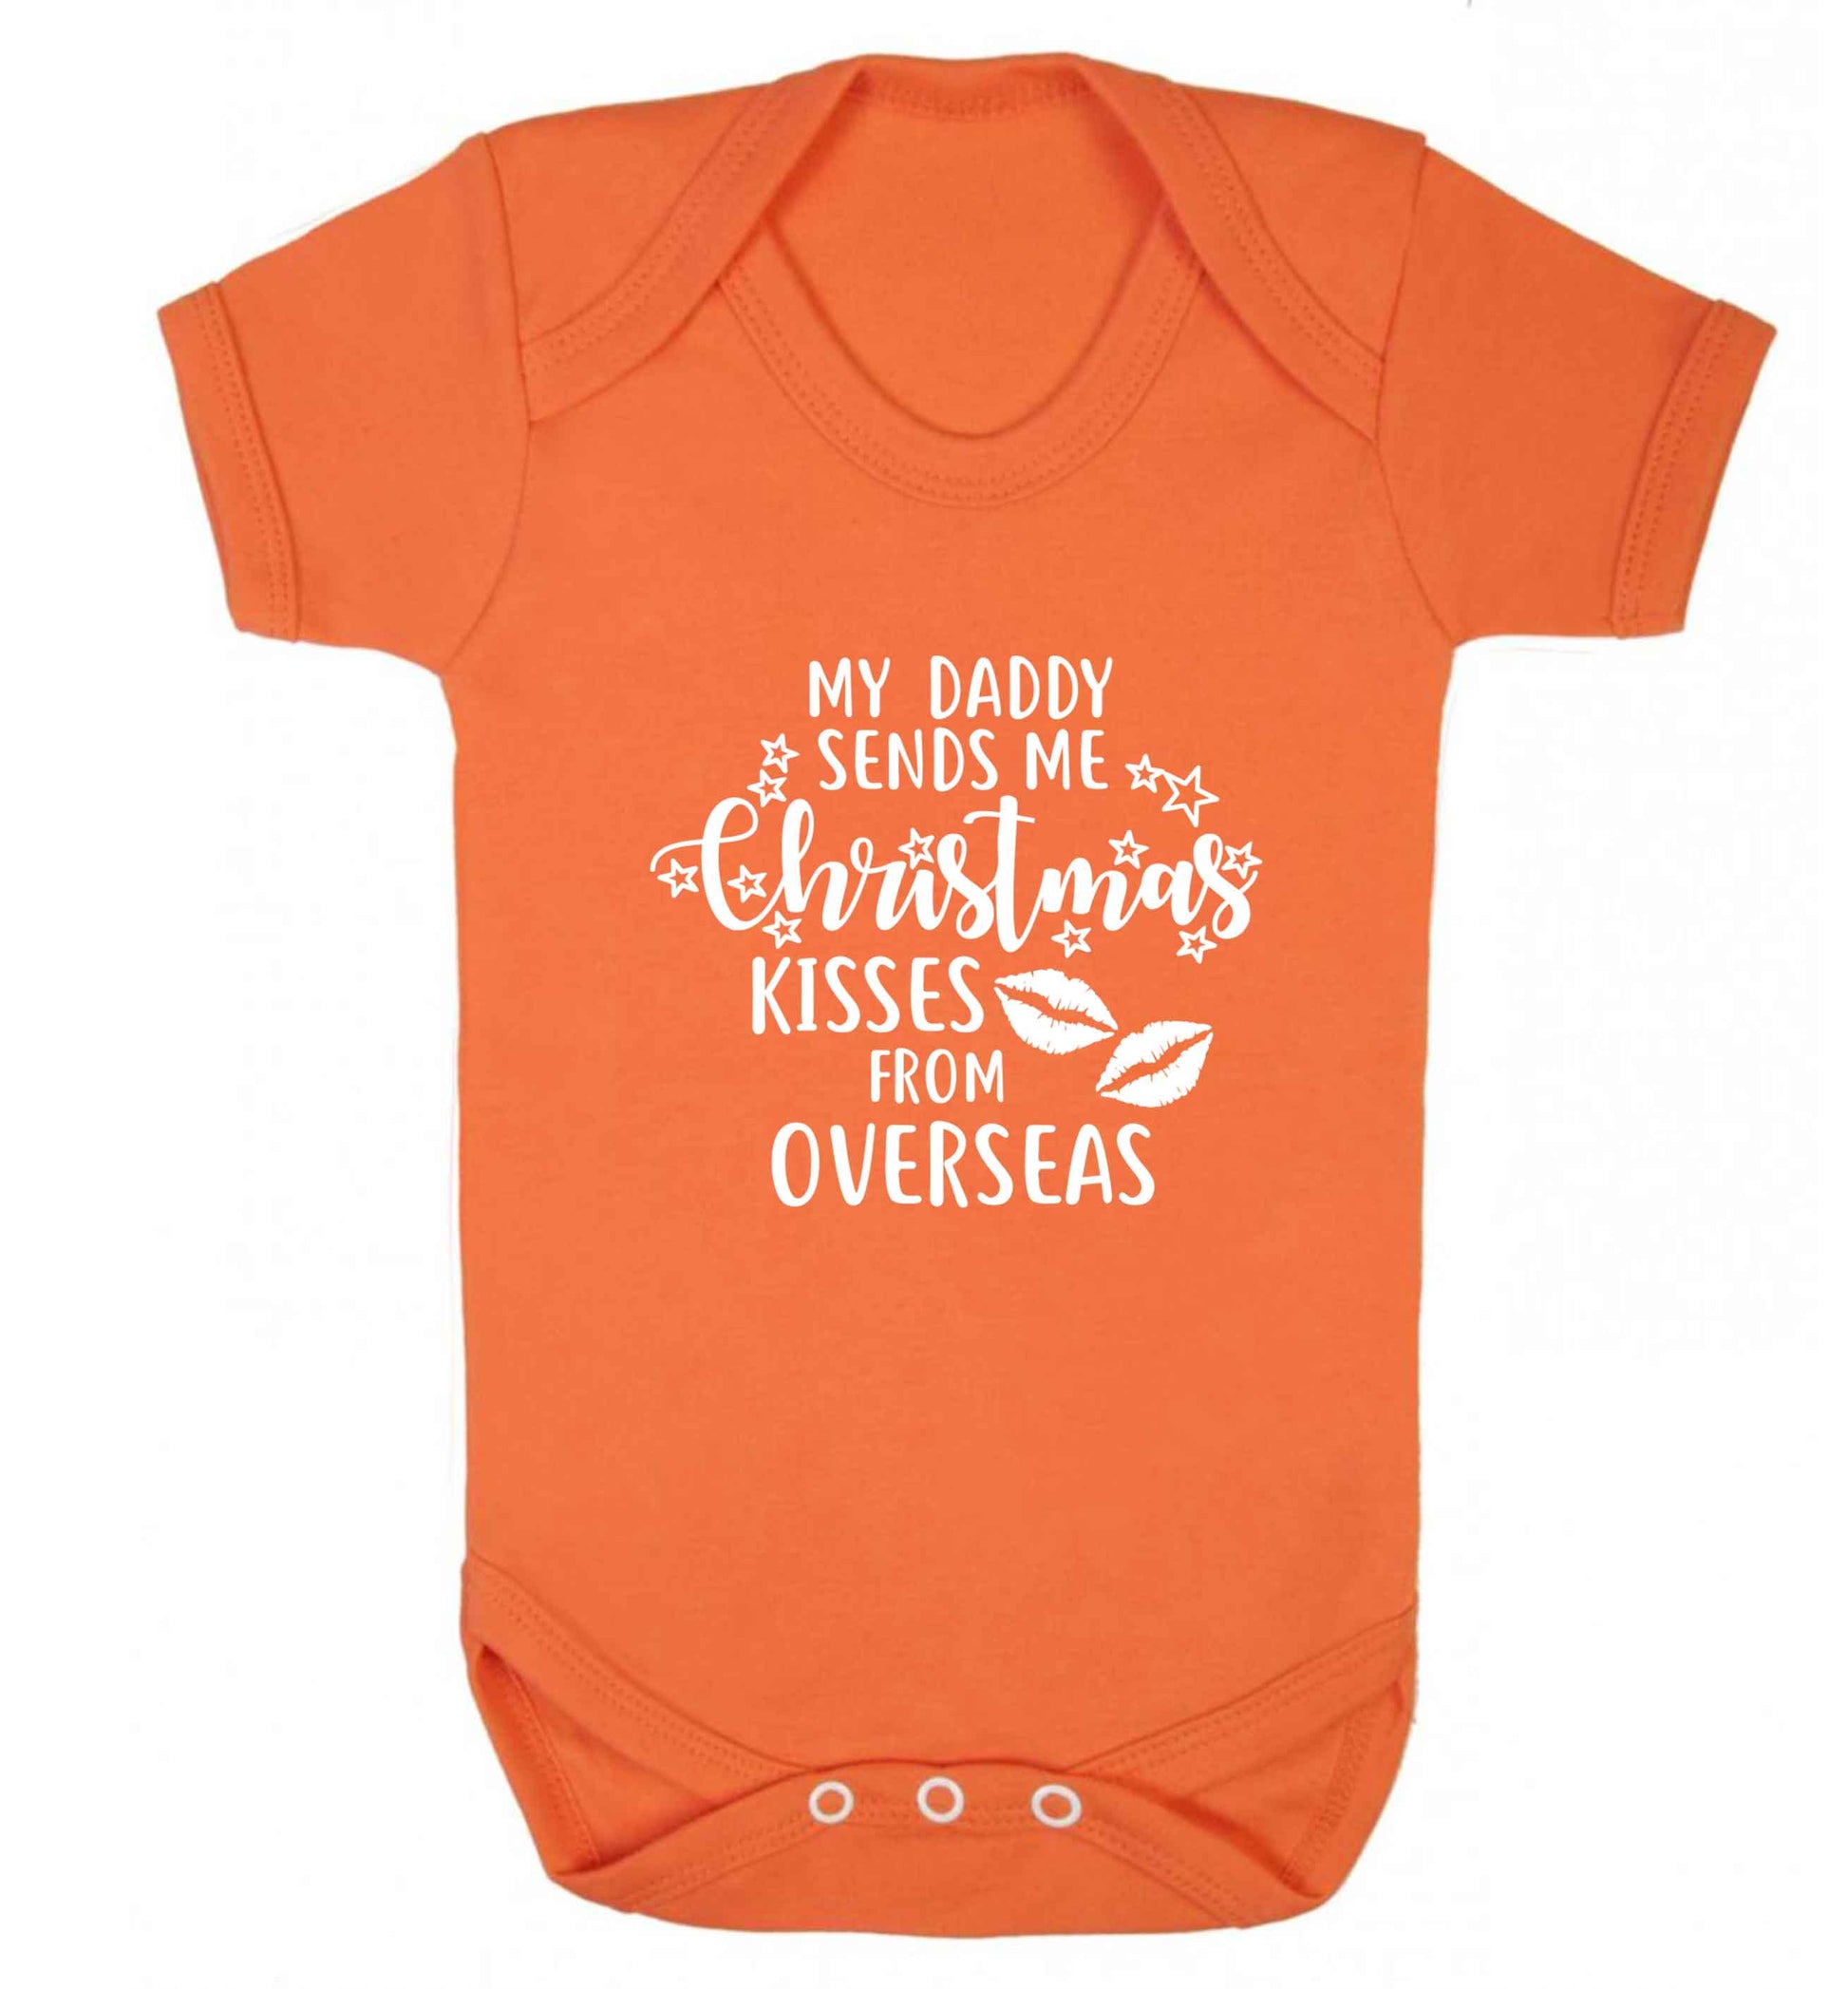 Daddy Christmas Kisses Overseas baby vest orange 18-24 months